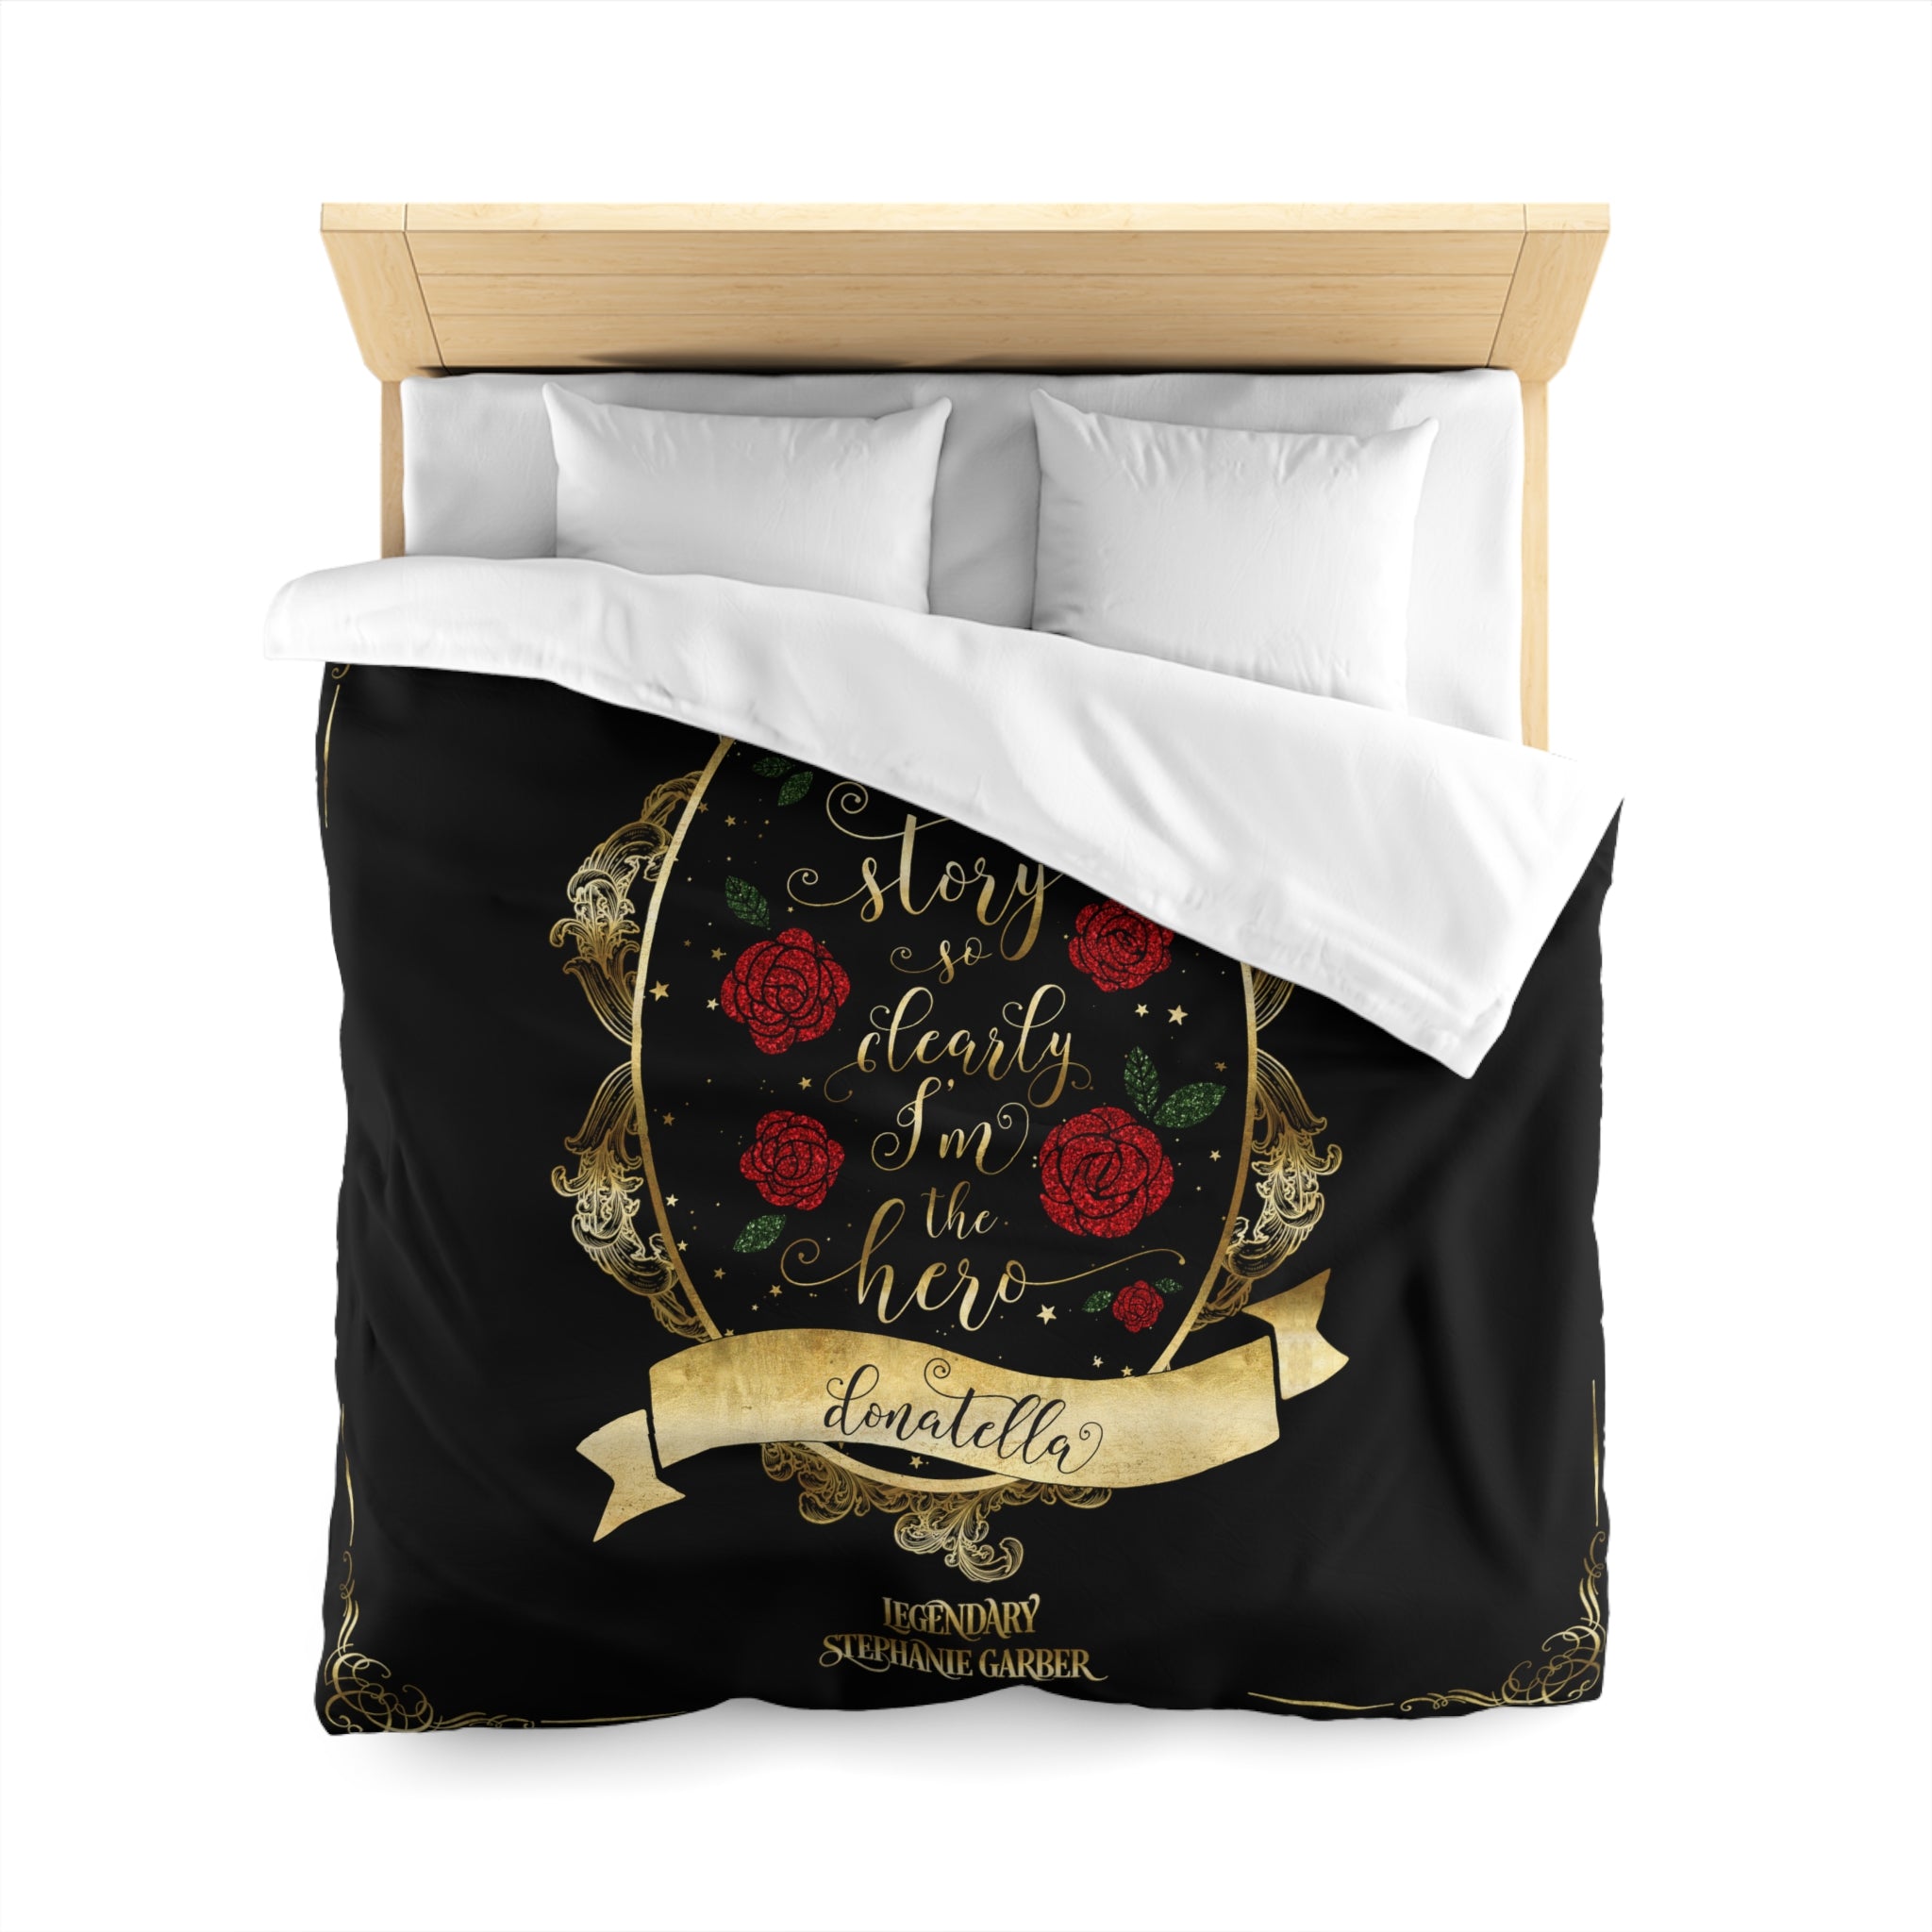 It's my story... Caraval Duvet Cover